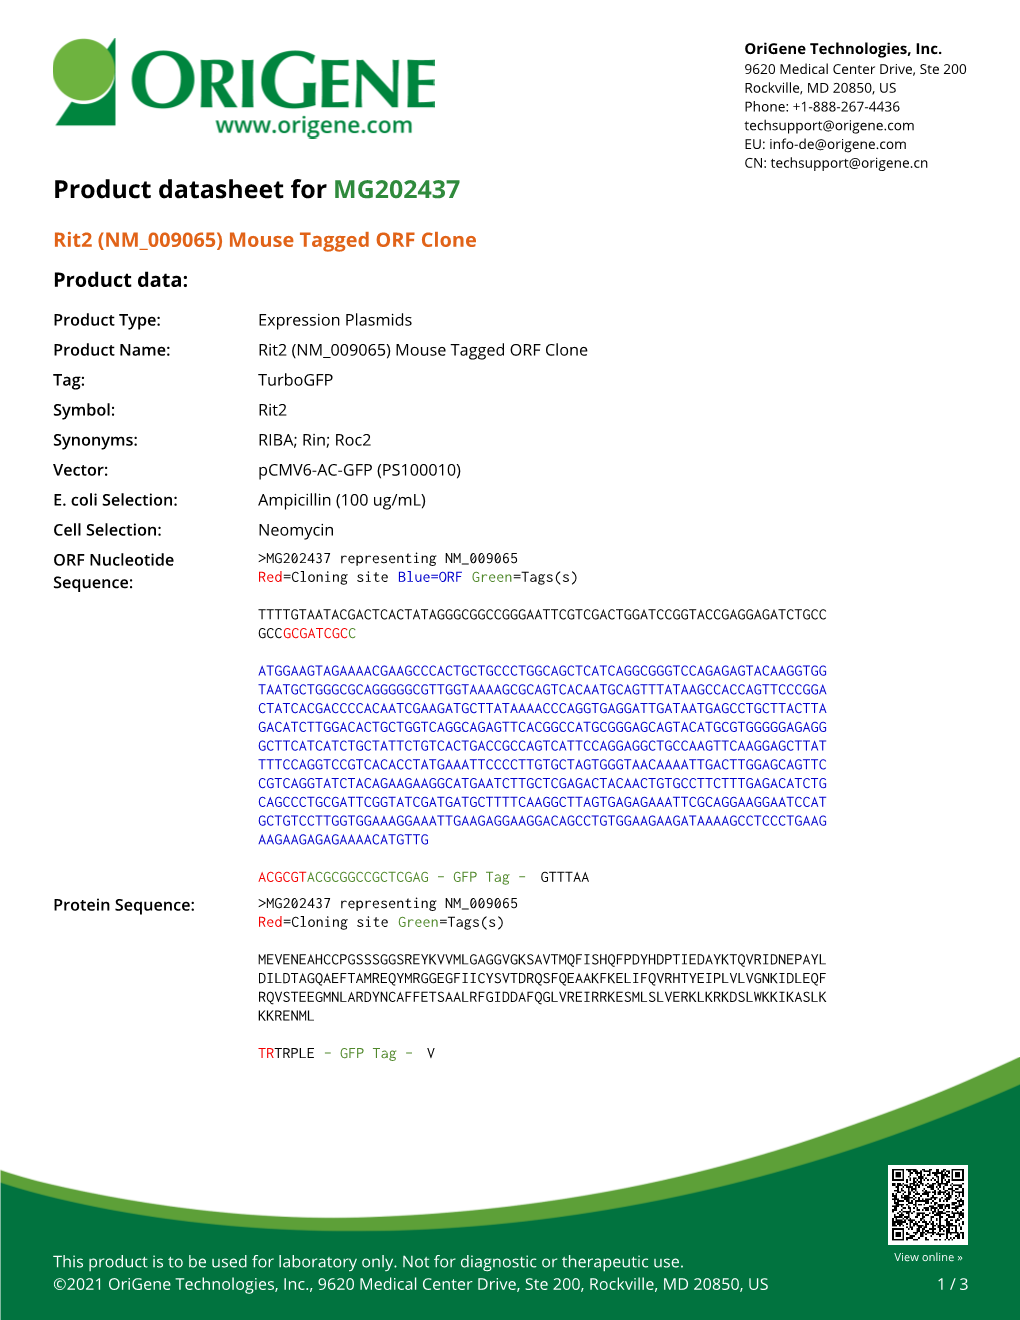 Rit2 (NM 009065) Mouse Tagged ORF Clone – MG202437 | Origene